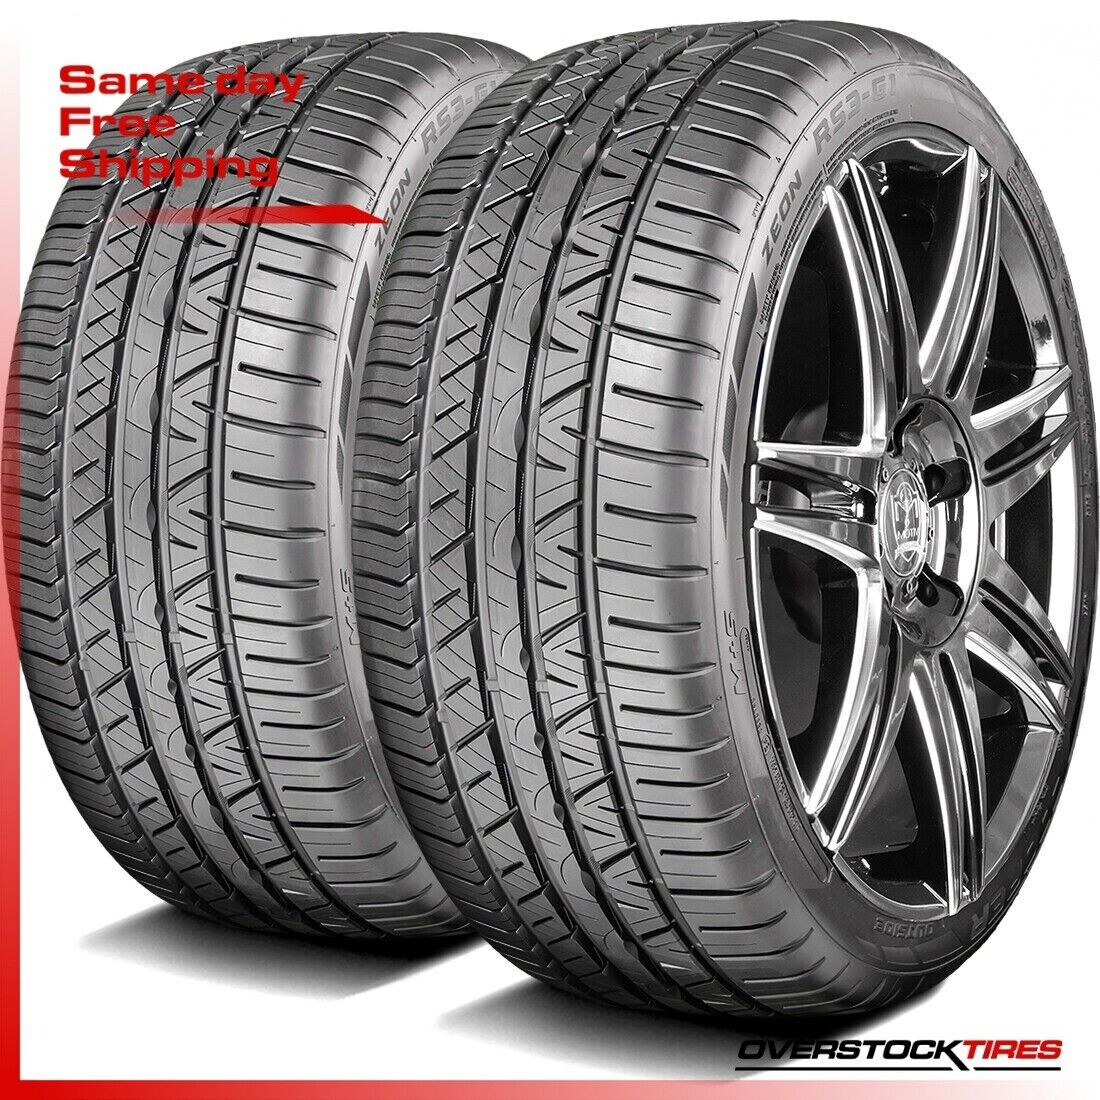 2 NEW 215/50R17 Cooper Zeon Rs3-G1 95W Tires 215 50 R17